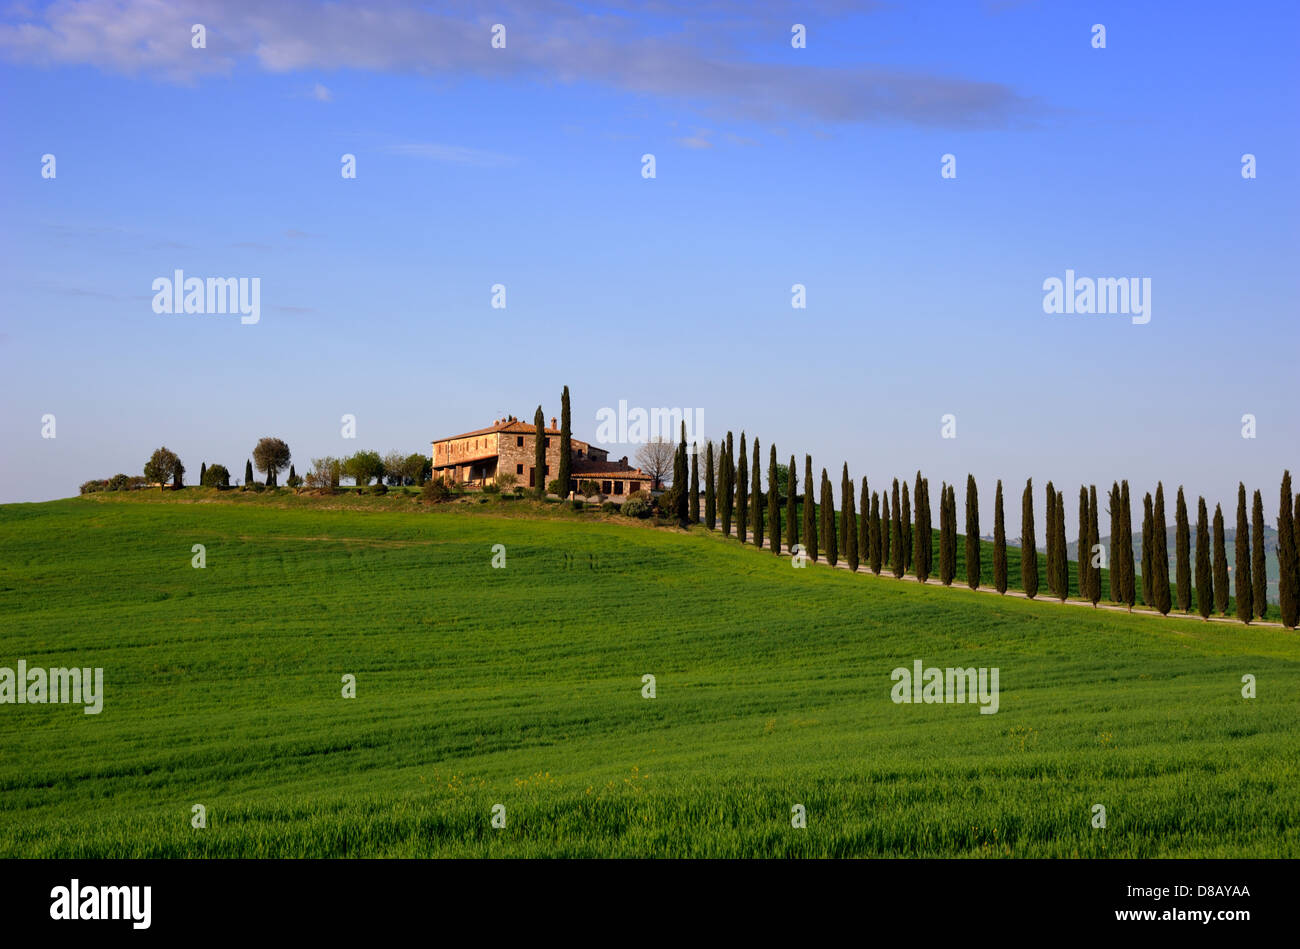 Italy, Tuscany, Val d'Orcia, Agriturismo Poggio Covili, wheat fields, cypress trees and house Stock Photo